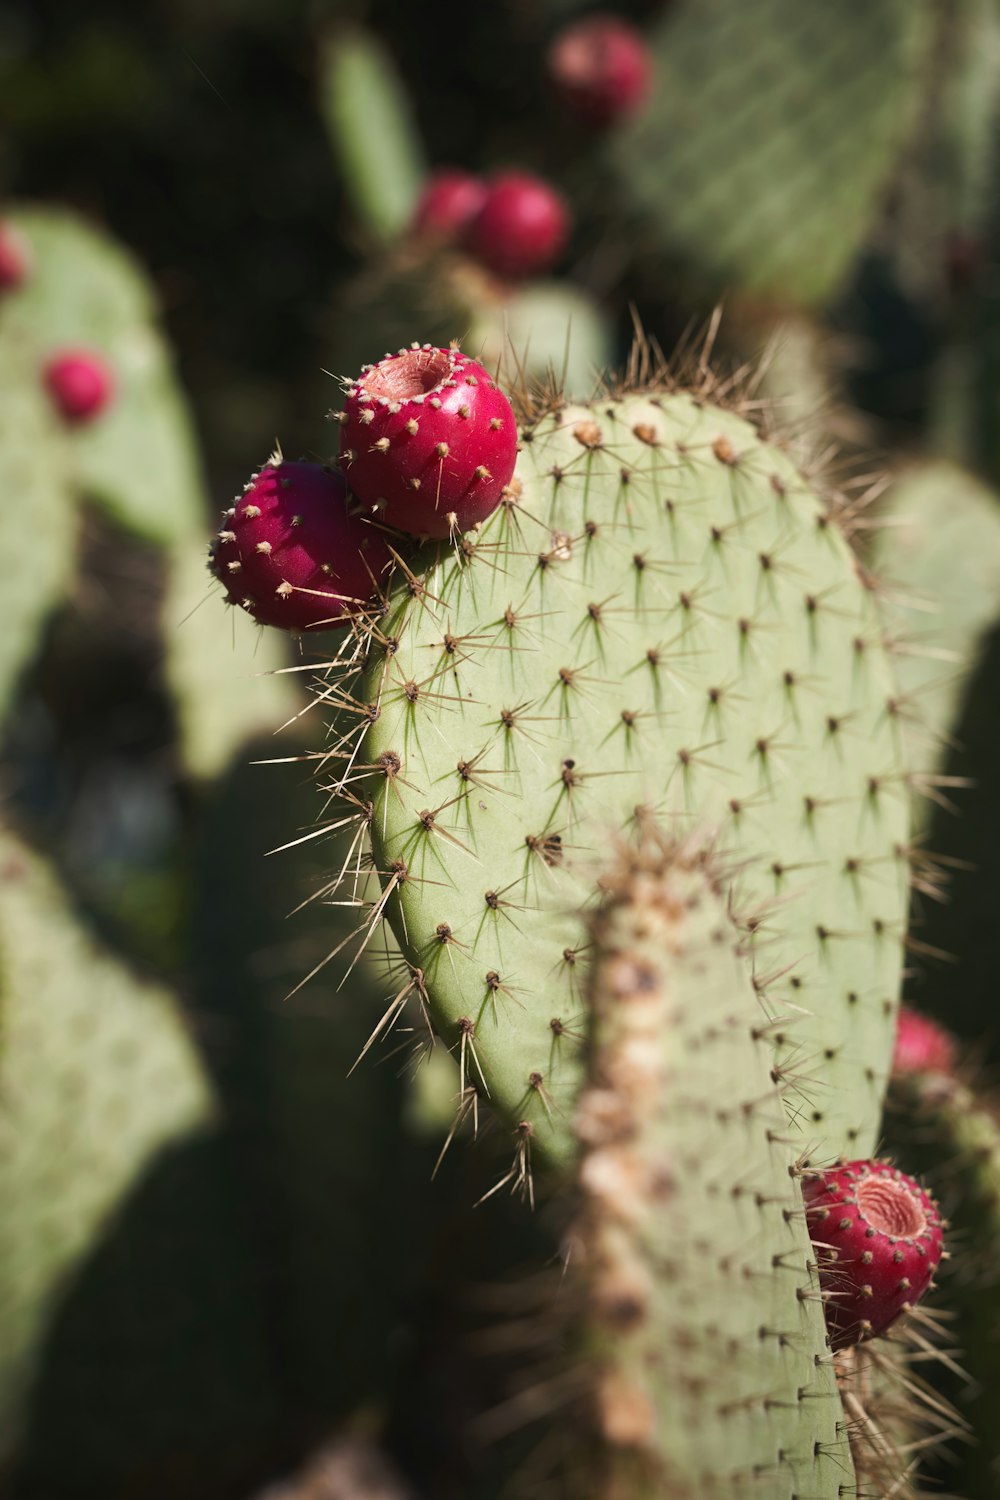 a close up of a cactus with red flowers